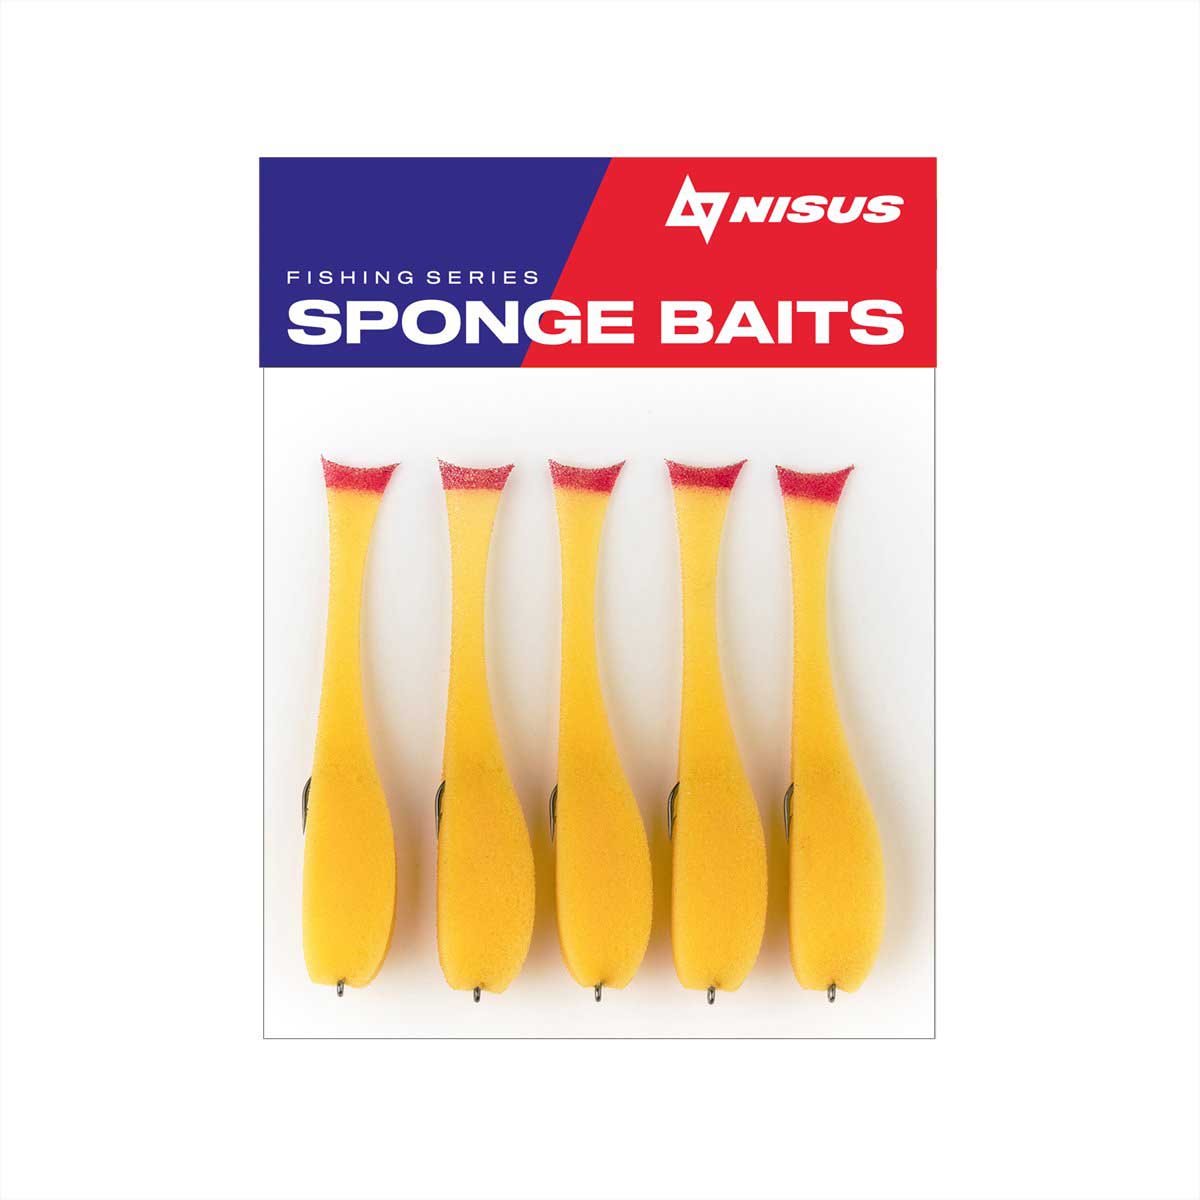 5 Sponge Bait with an Offset Hook for Predatory Fish, Multi-Colored, 5 pcs